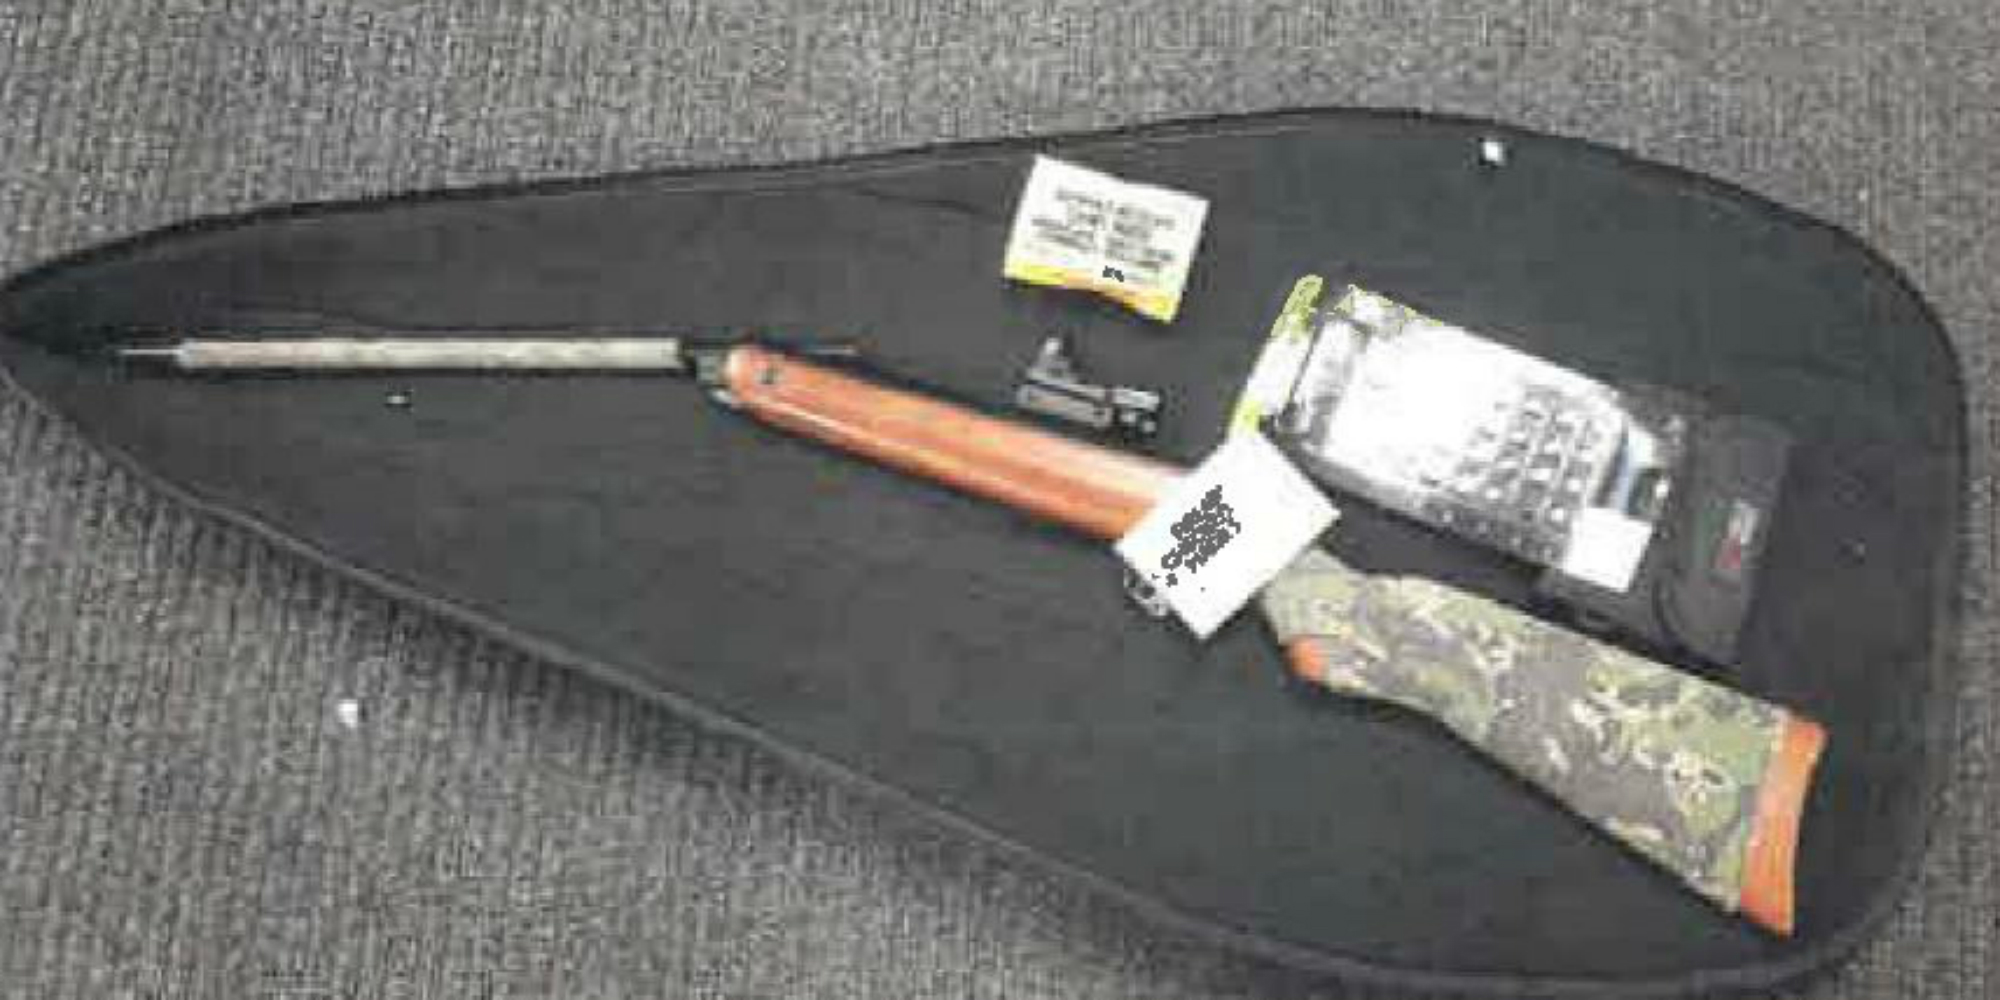 Image supplied by CPS of air rifle used by Lloyd Williams to shoot his wife